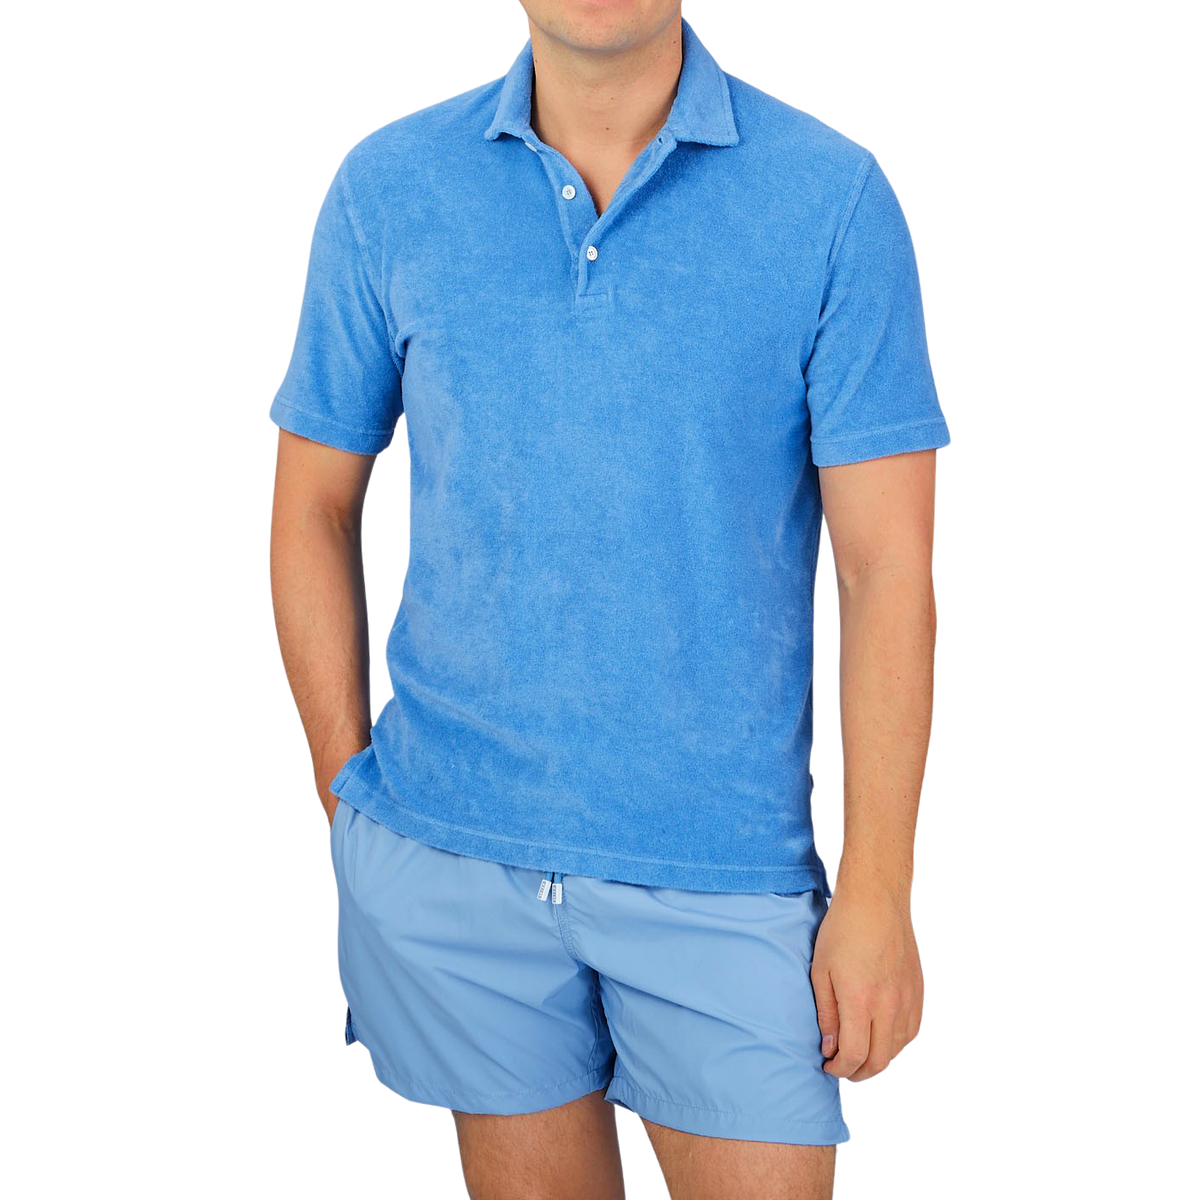 A man wearing a Fedeli Bright Blue Cotton Towelling Polo Shirt and shorts, his summer favorite.